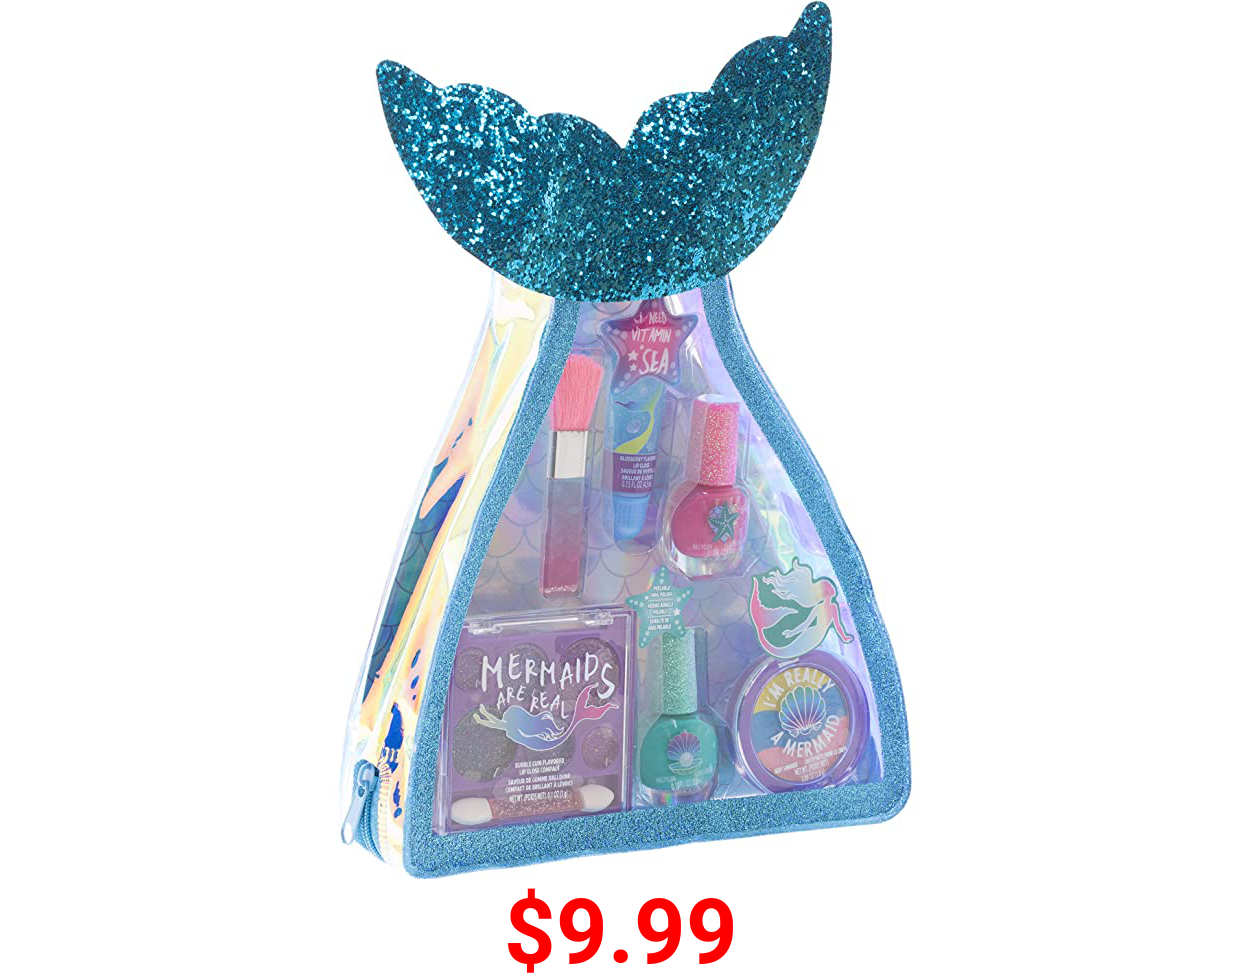 Townley Girl Mermaid Vibes Makeup Set with 8 Pieces, Including Lip Gloss, Nail Polish, Body Shimmer and More in Mermaid Bag, Ages 3+ for Parties, Sleepovers and Makeovers